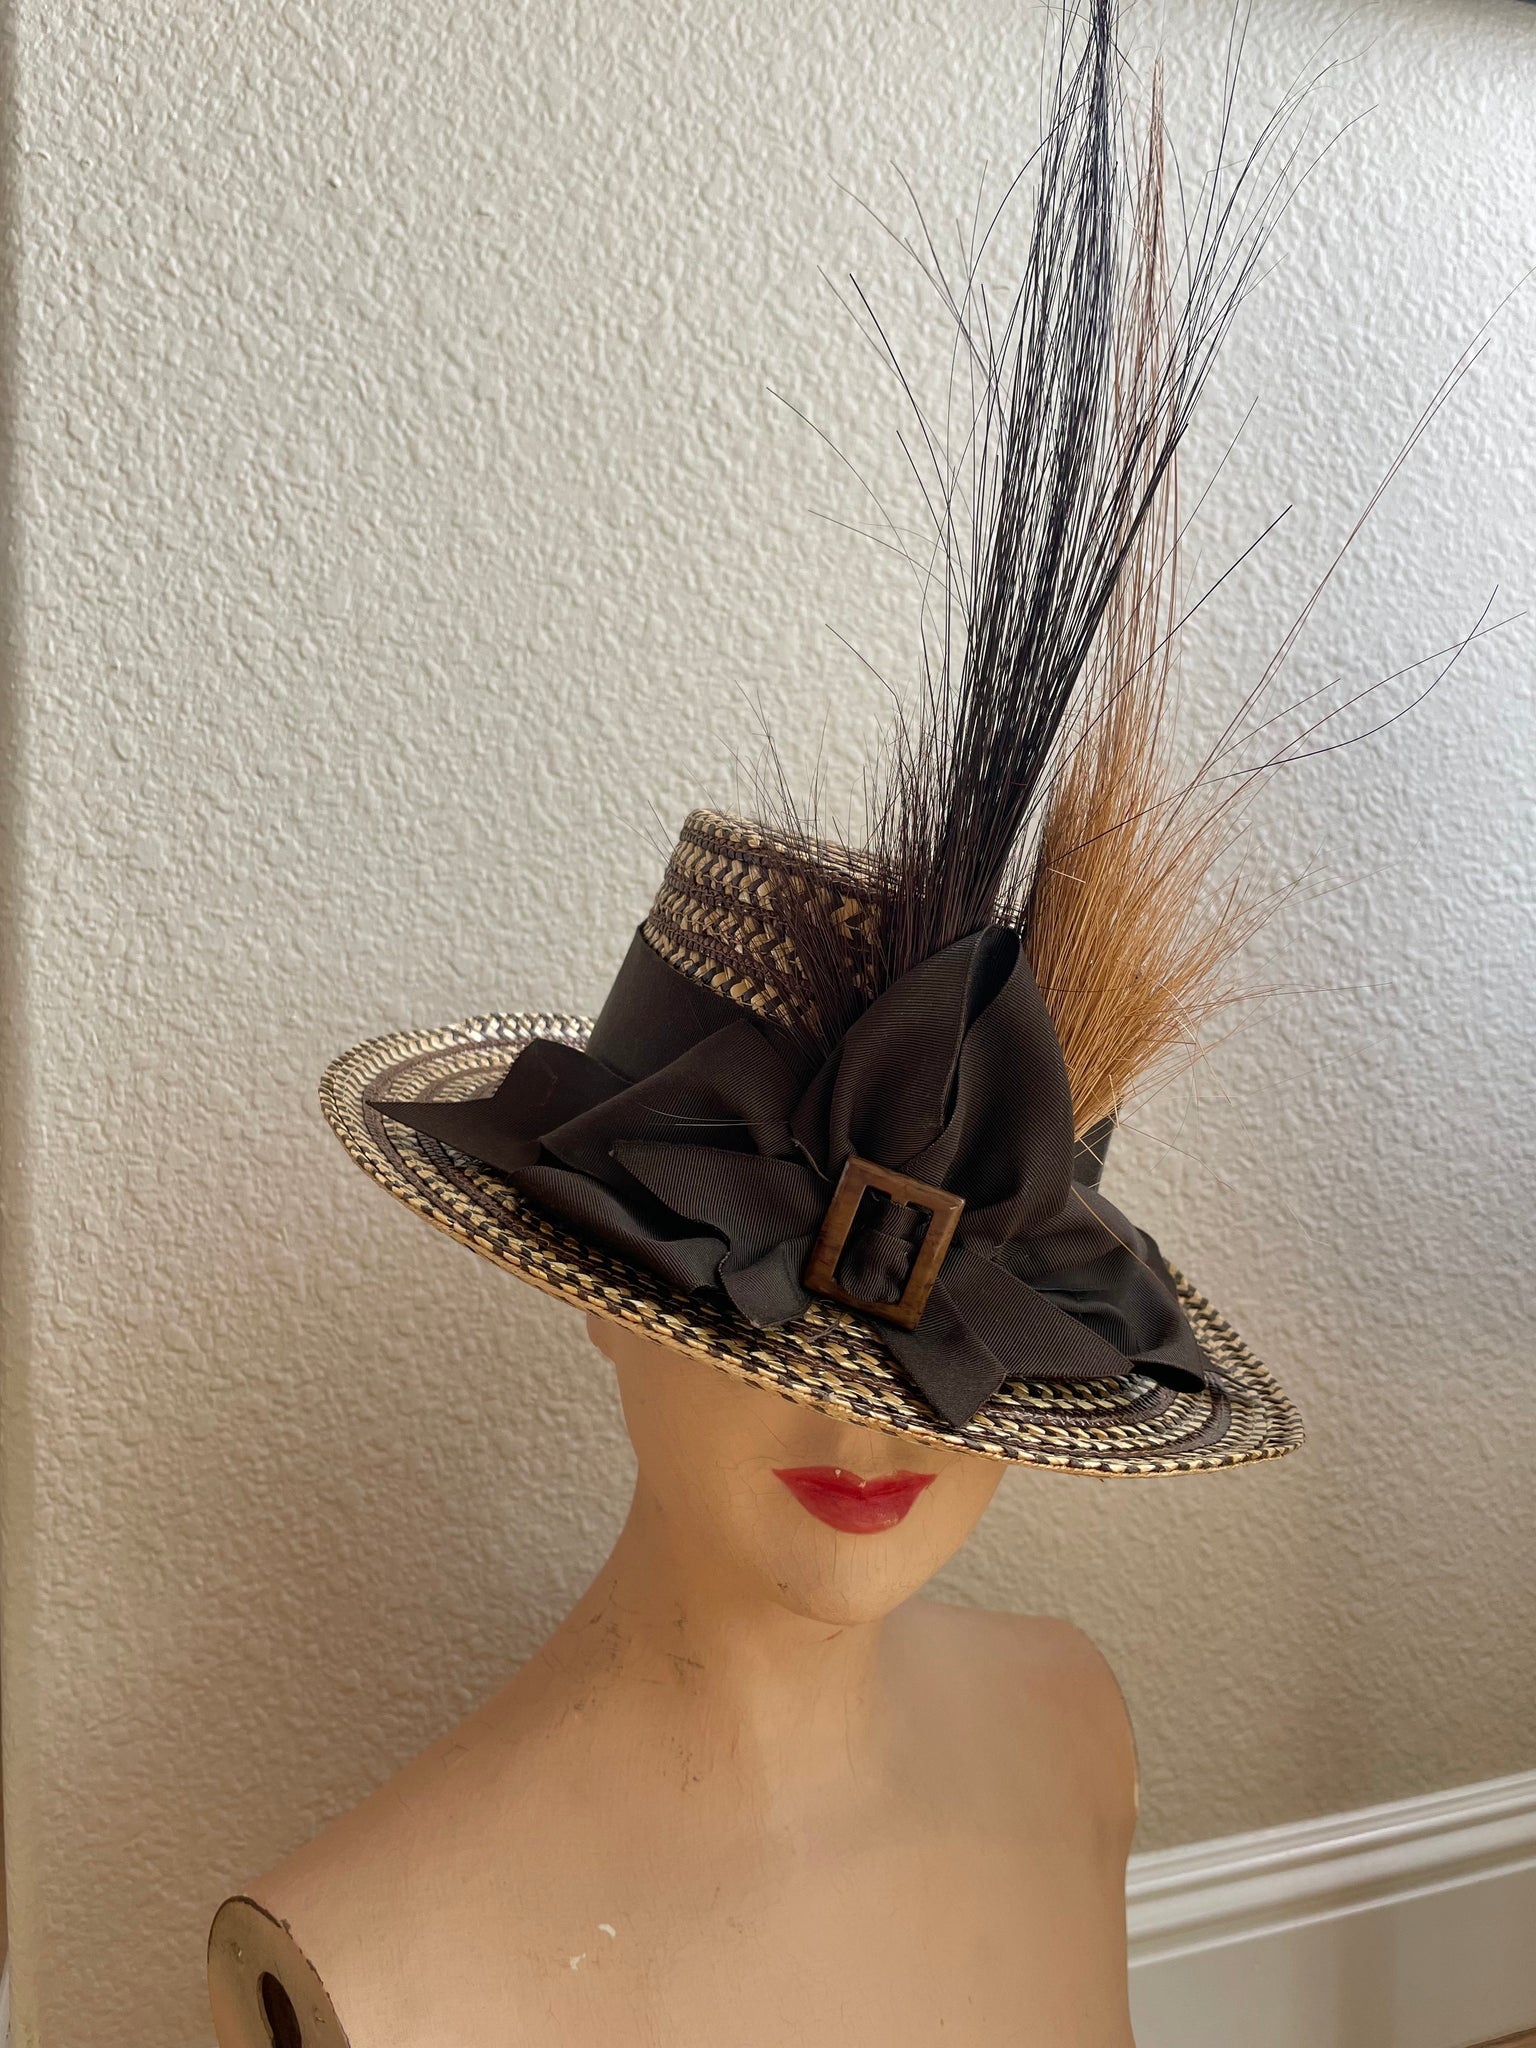 1880s Woven Straw Plume Buckle Tall Hat ( Matching Counterpart to 1880s Wool Calico Dress )